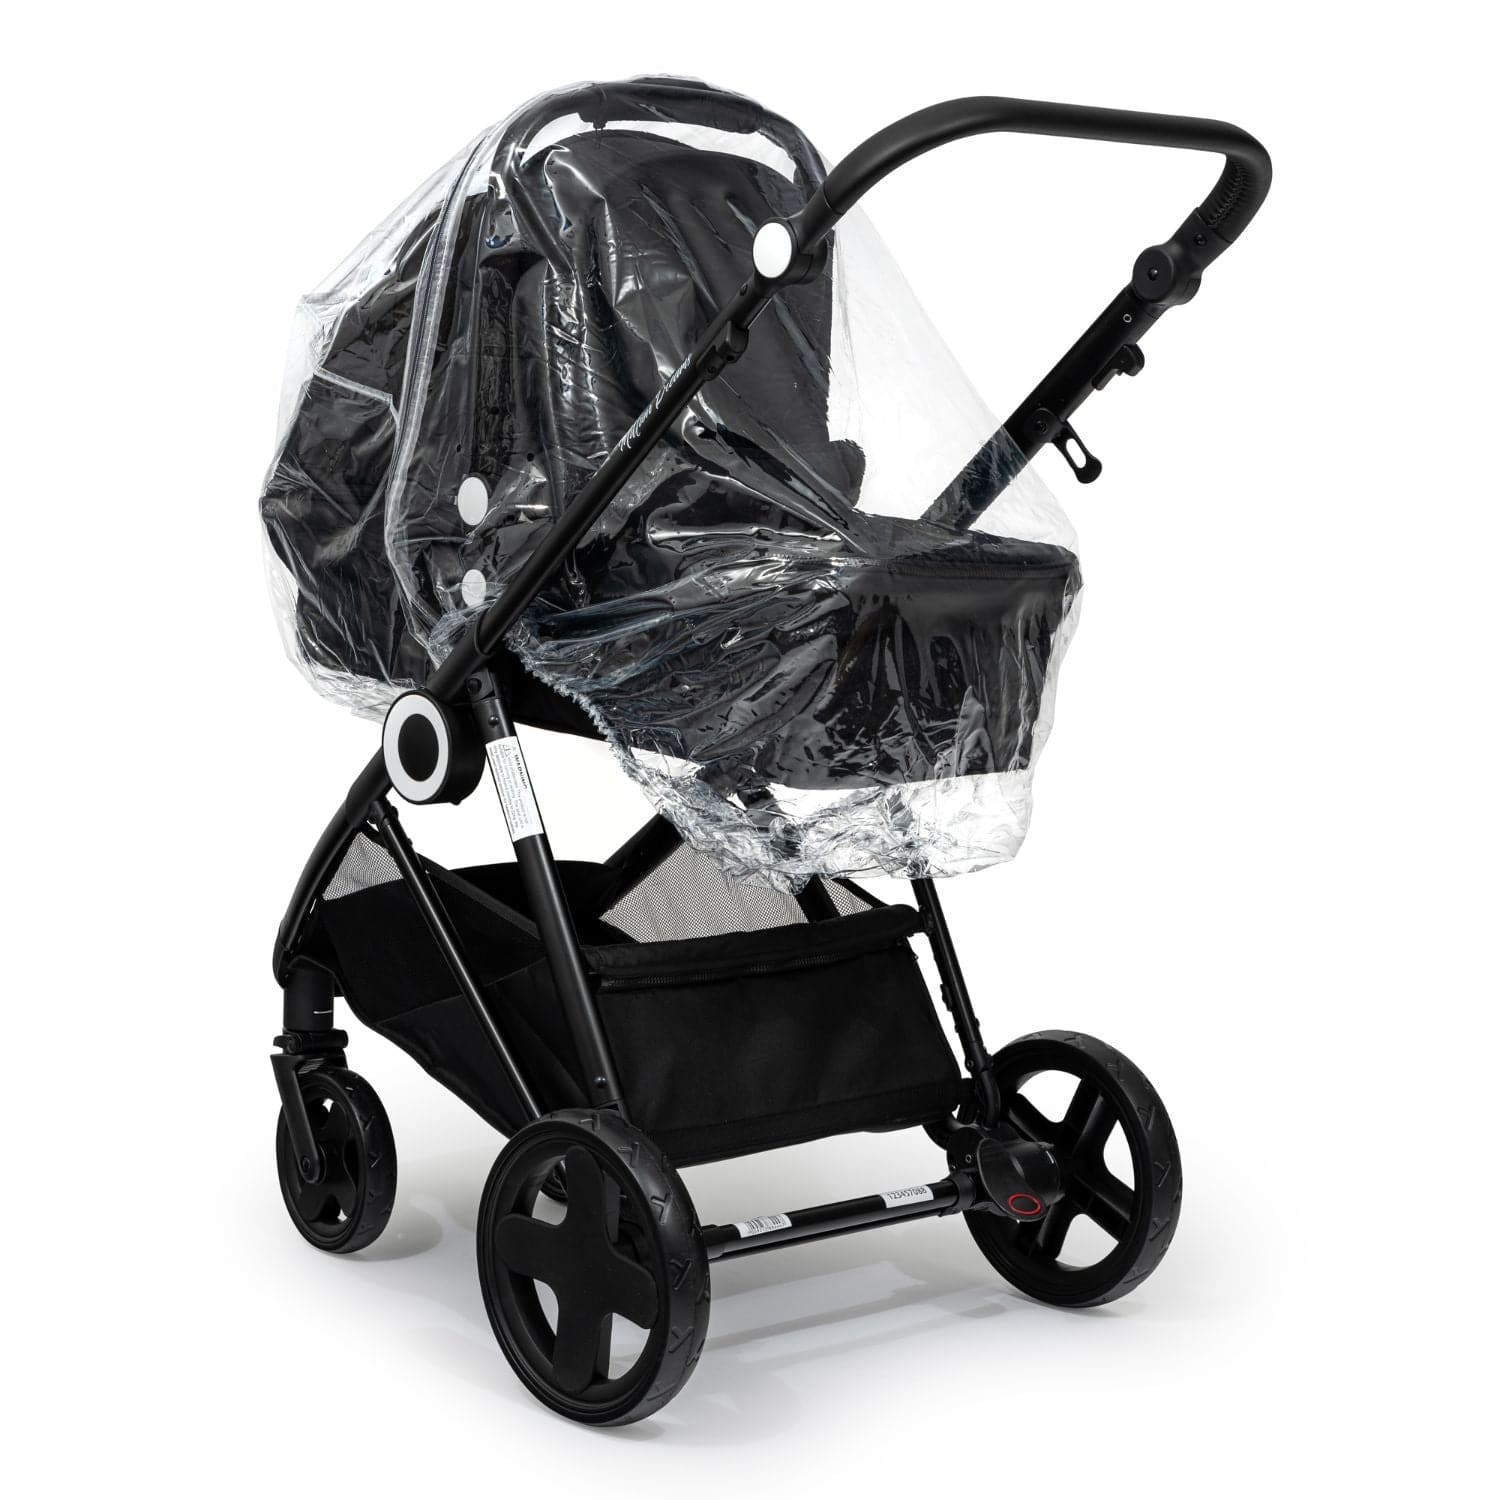 Carrycot Raincover Compatible With Hesba - Fits All Models - For Your Little One